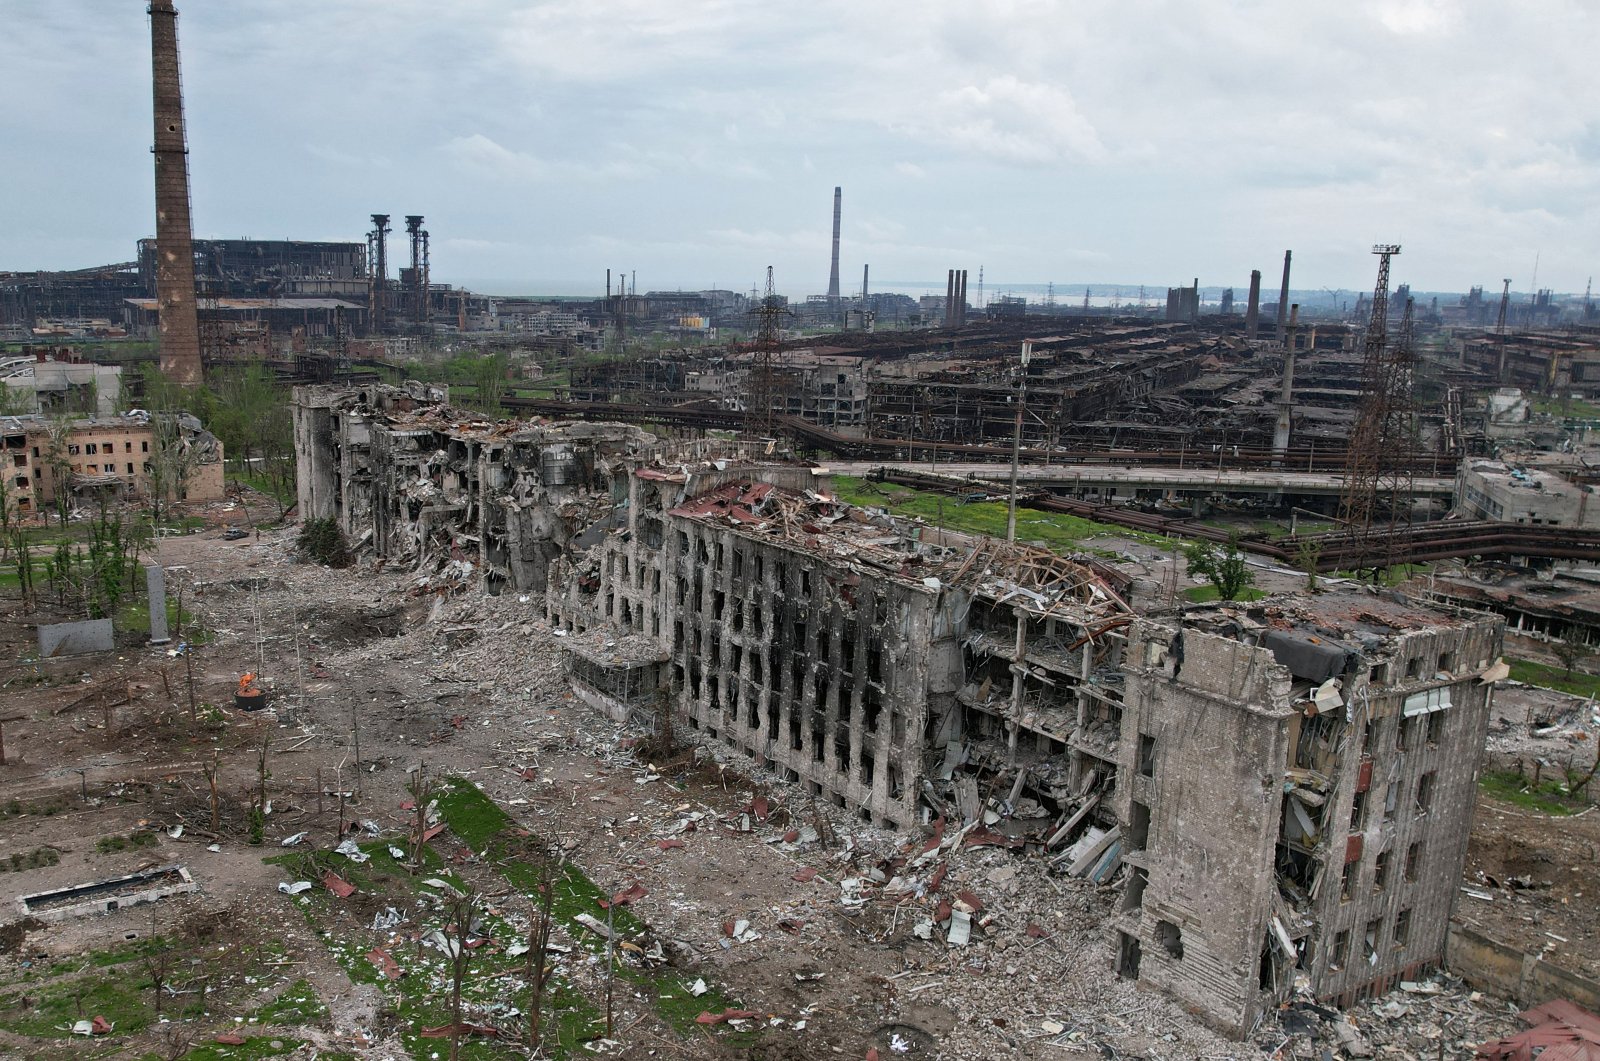 A view shows the destroyed facilities of Azovstal Iron and Steel Works during the Ukraine-Russia conflict in the southern port city of Mariupol, Ukraine, May 22, 2022. (Reuters Photo)